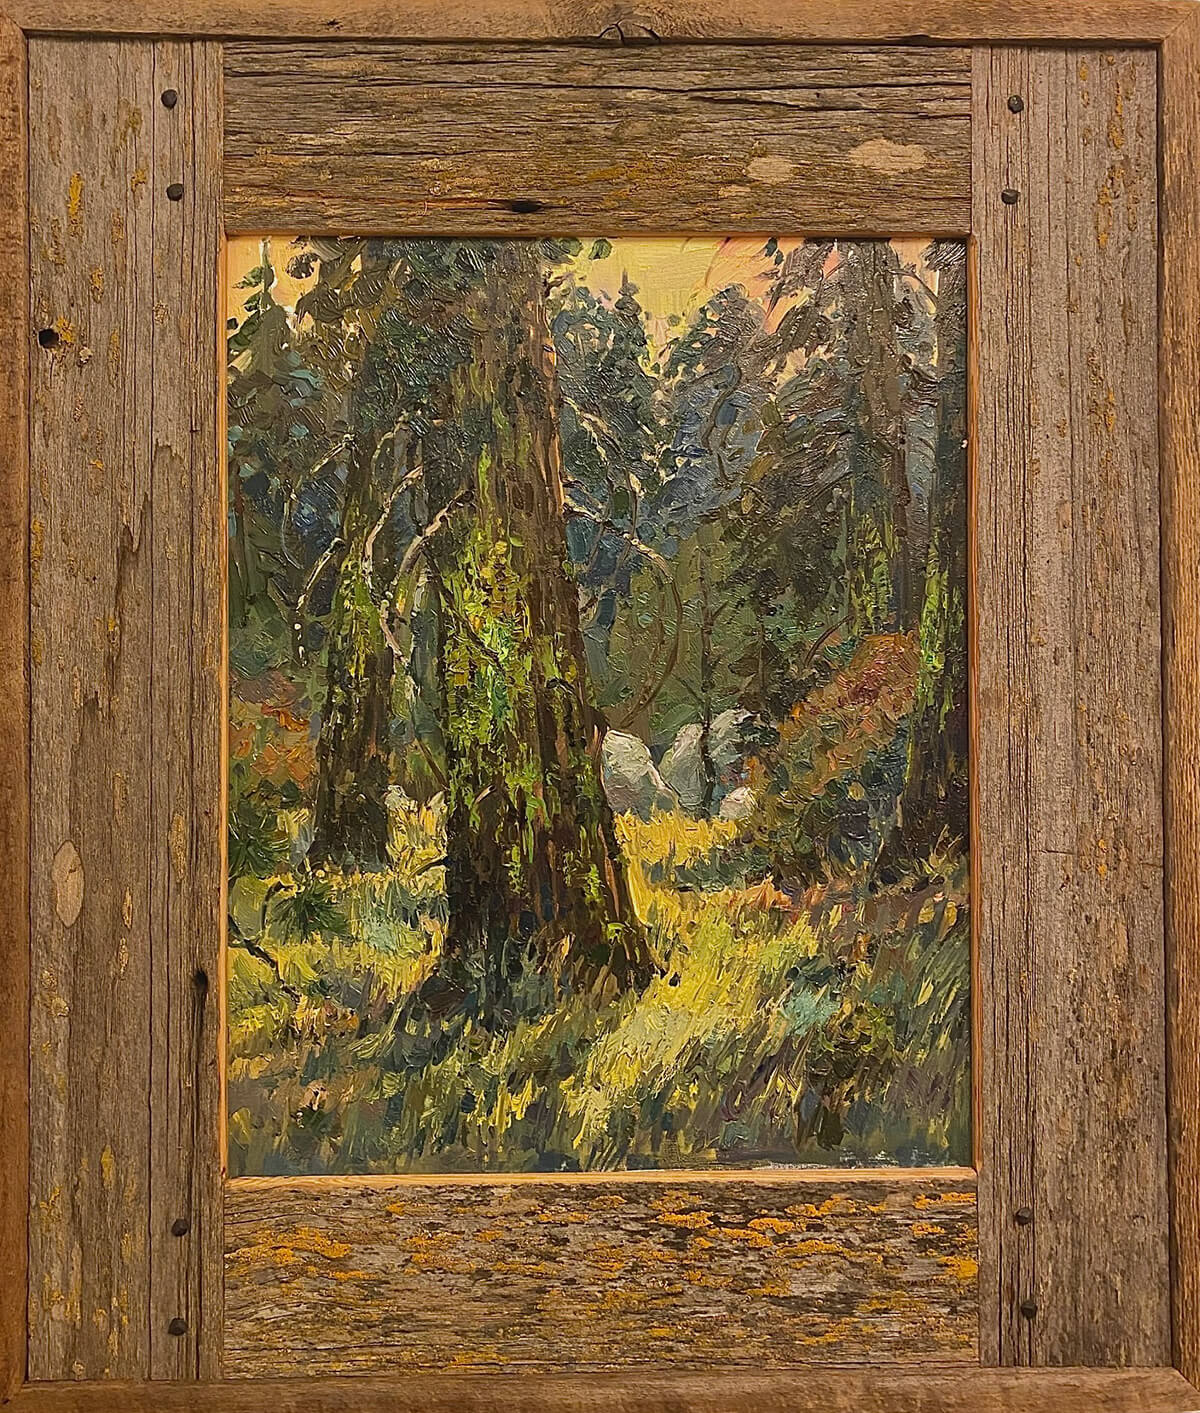 A wood-framed painting of a mossy forest.